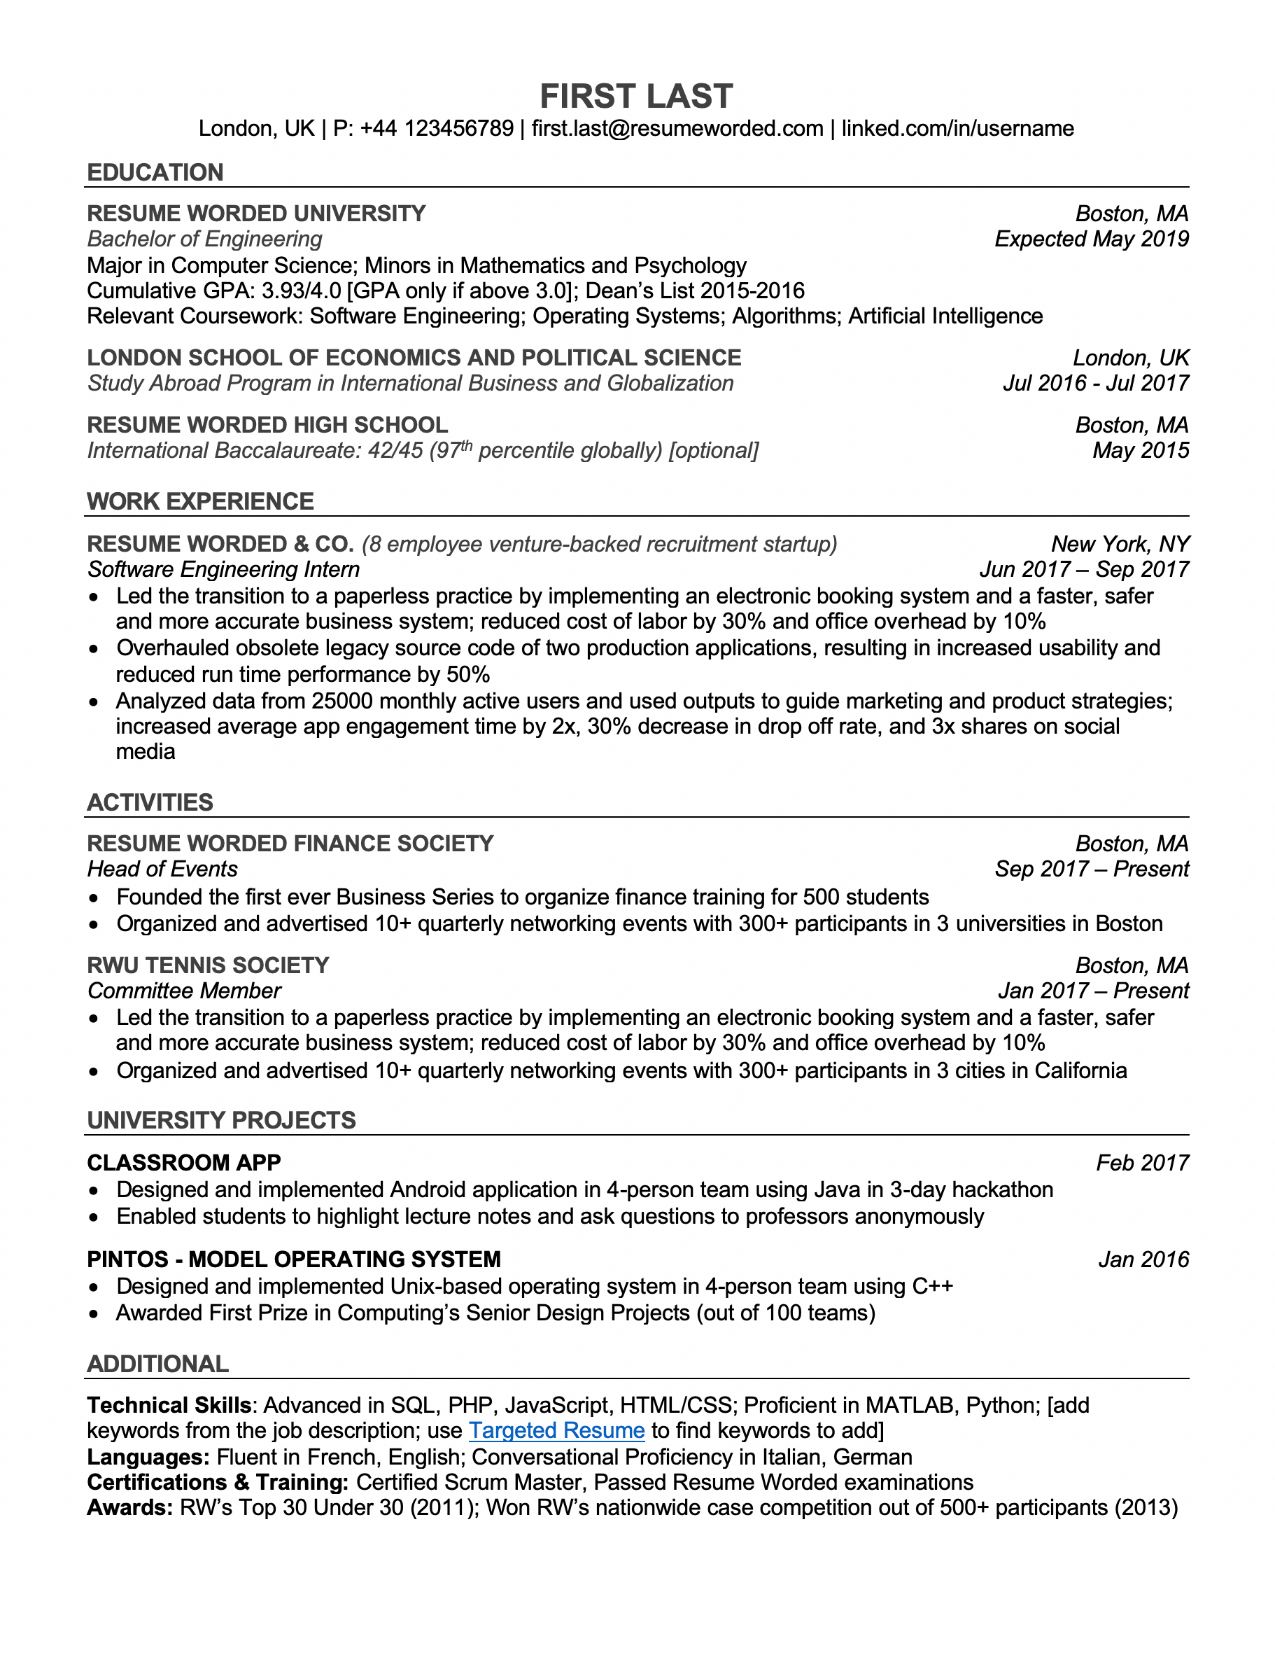 Cv Template Students from resumeworded.com